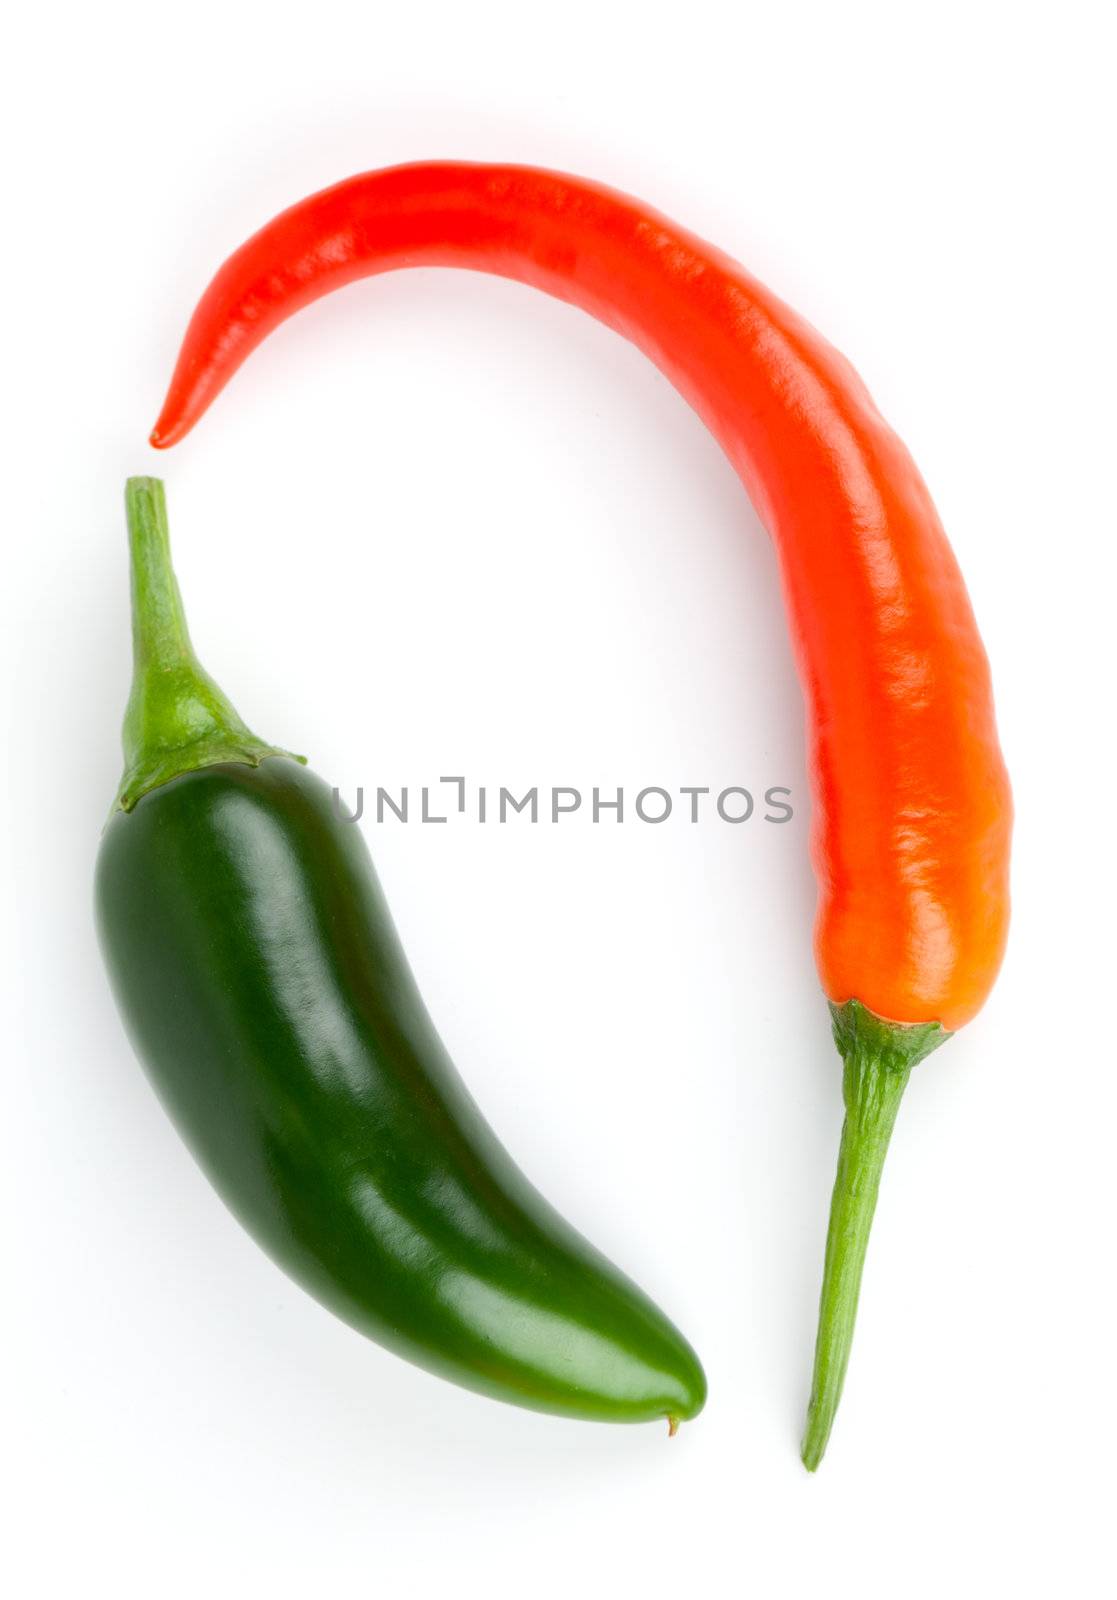 Hot chili pepper and green Jalapeno pepper isolated on white by motorolka